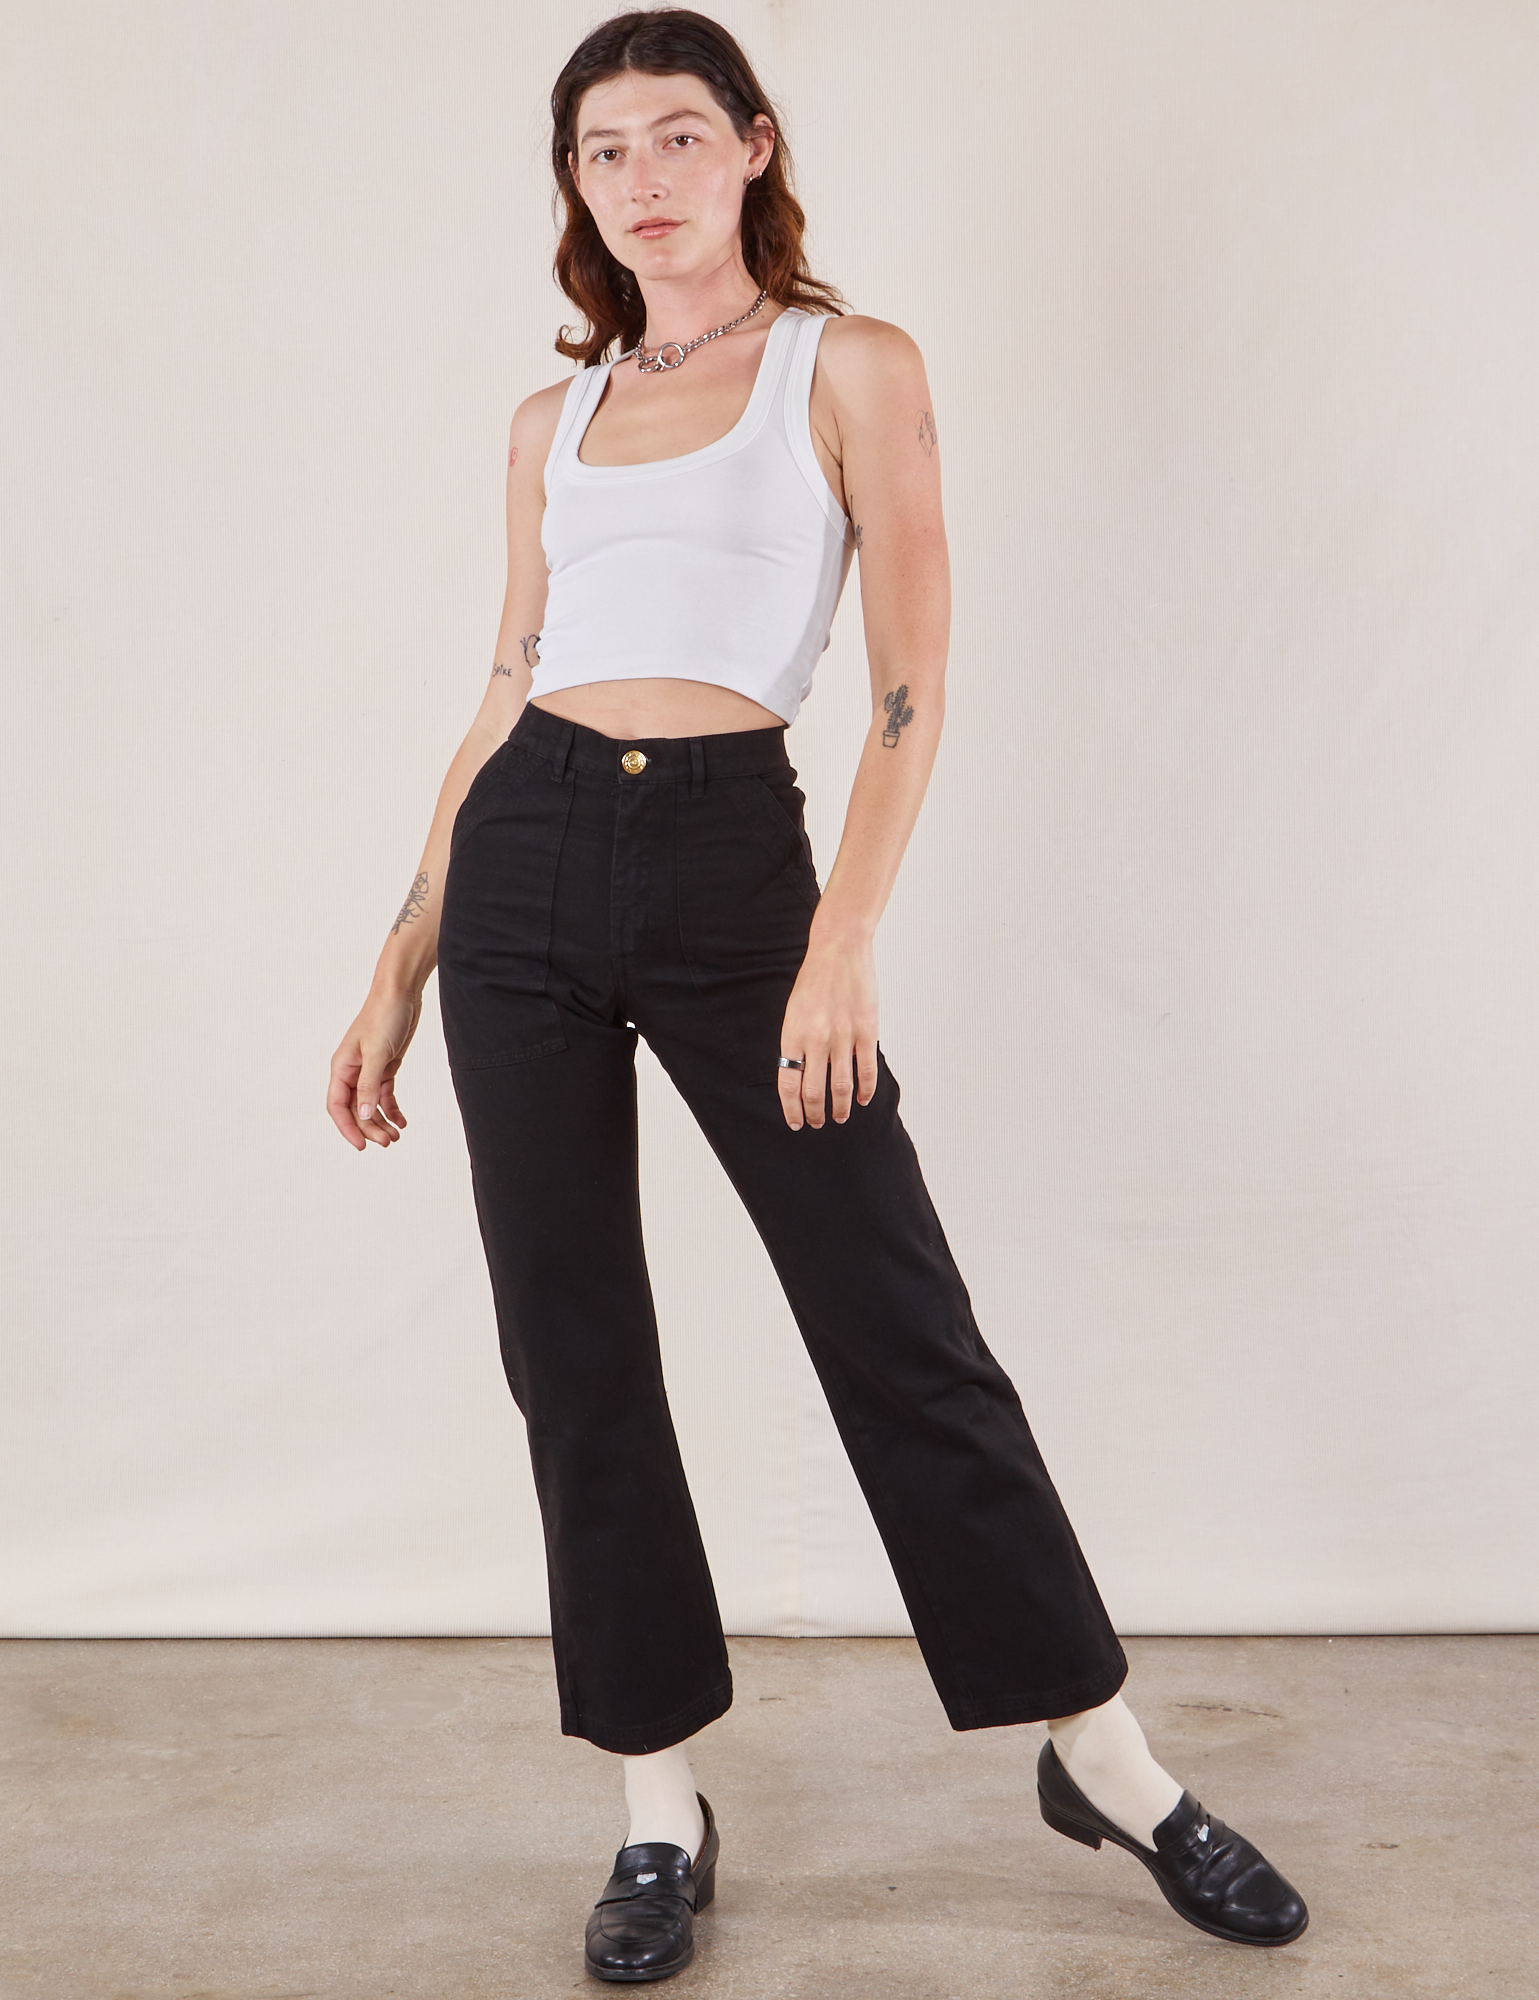 Alex is 5'8" and wearing XS Work Pants in Black paired with a Cropped Tank in vintage tee off-white